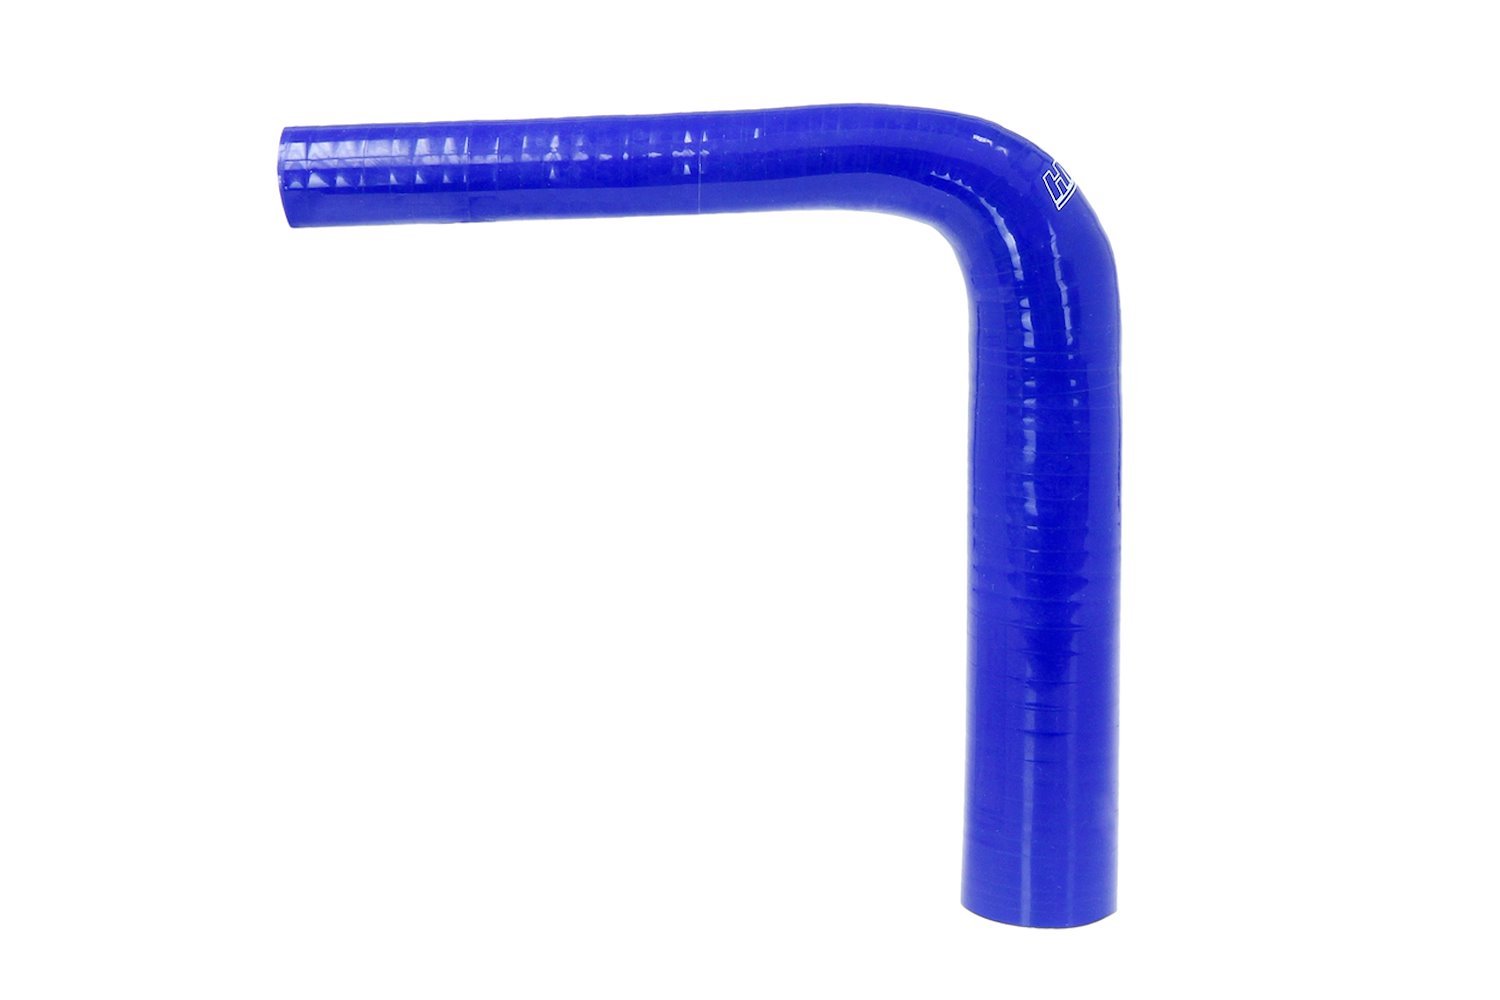 HTSER90-125-200-BLUE Silicone 90-Degree Elbow Hose, High-Temp 4-Ply Reinforced, 1-1/4 in. - 2 in. ID, Blue